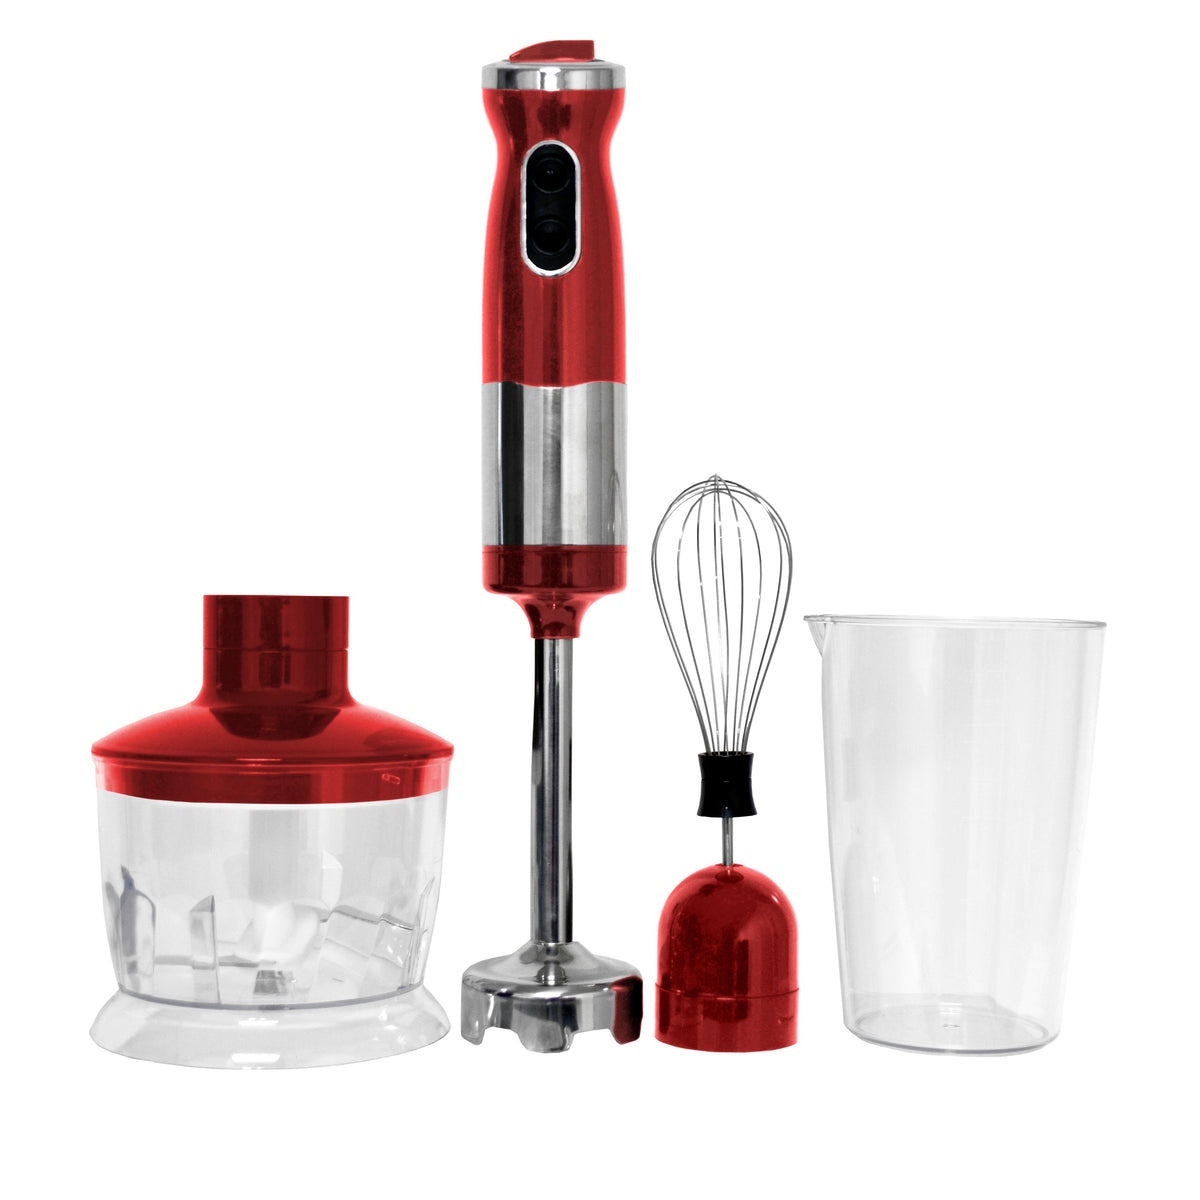 Electric Stick/ Hand Blender & Mixer (Red) 700ml Capacity